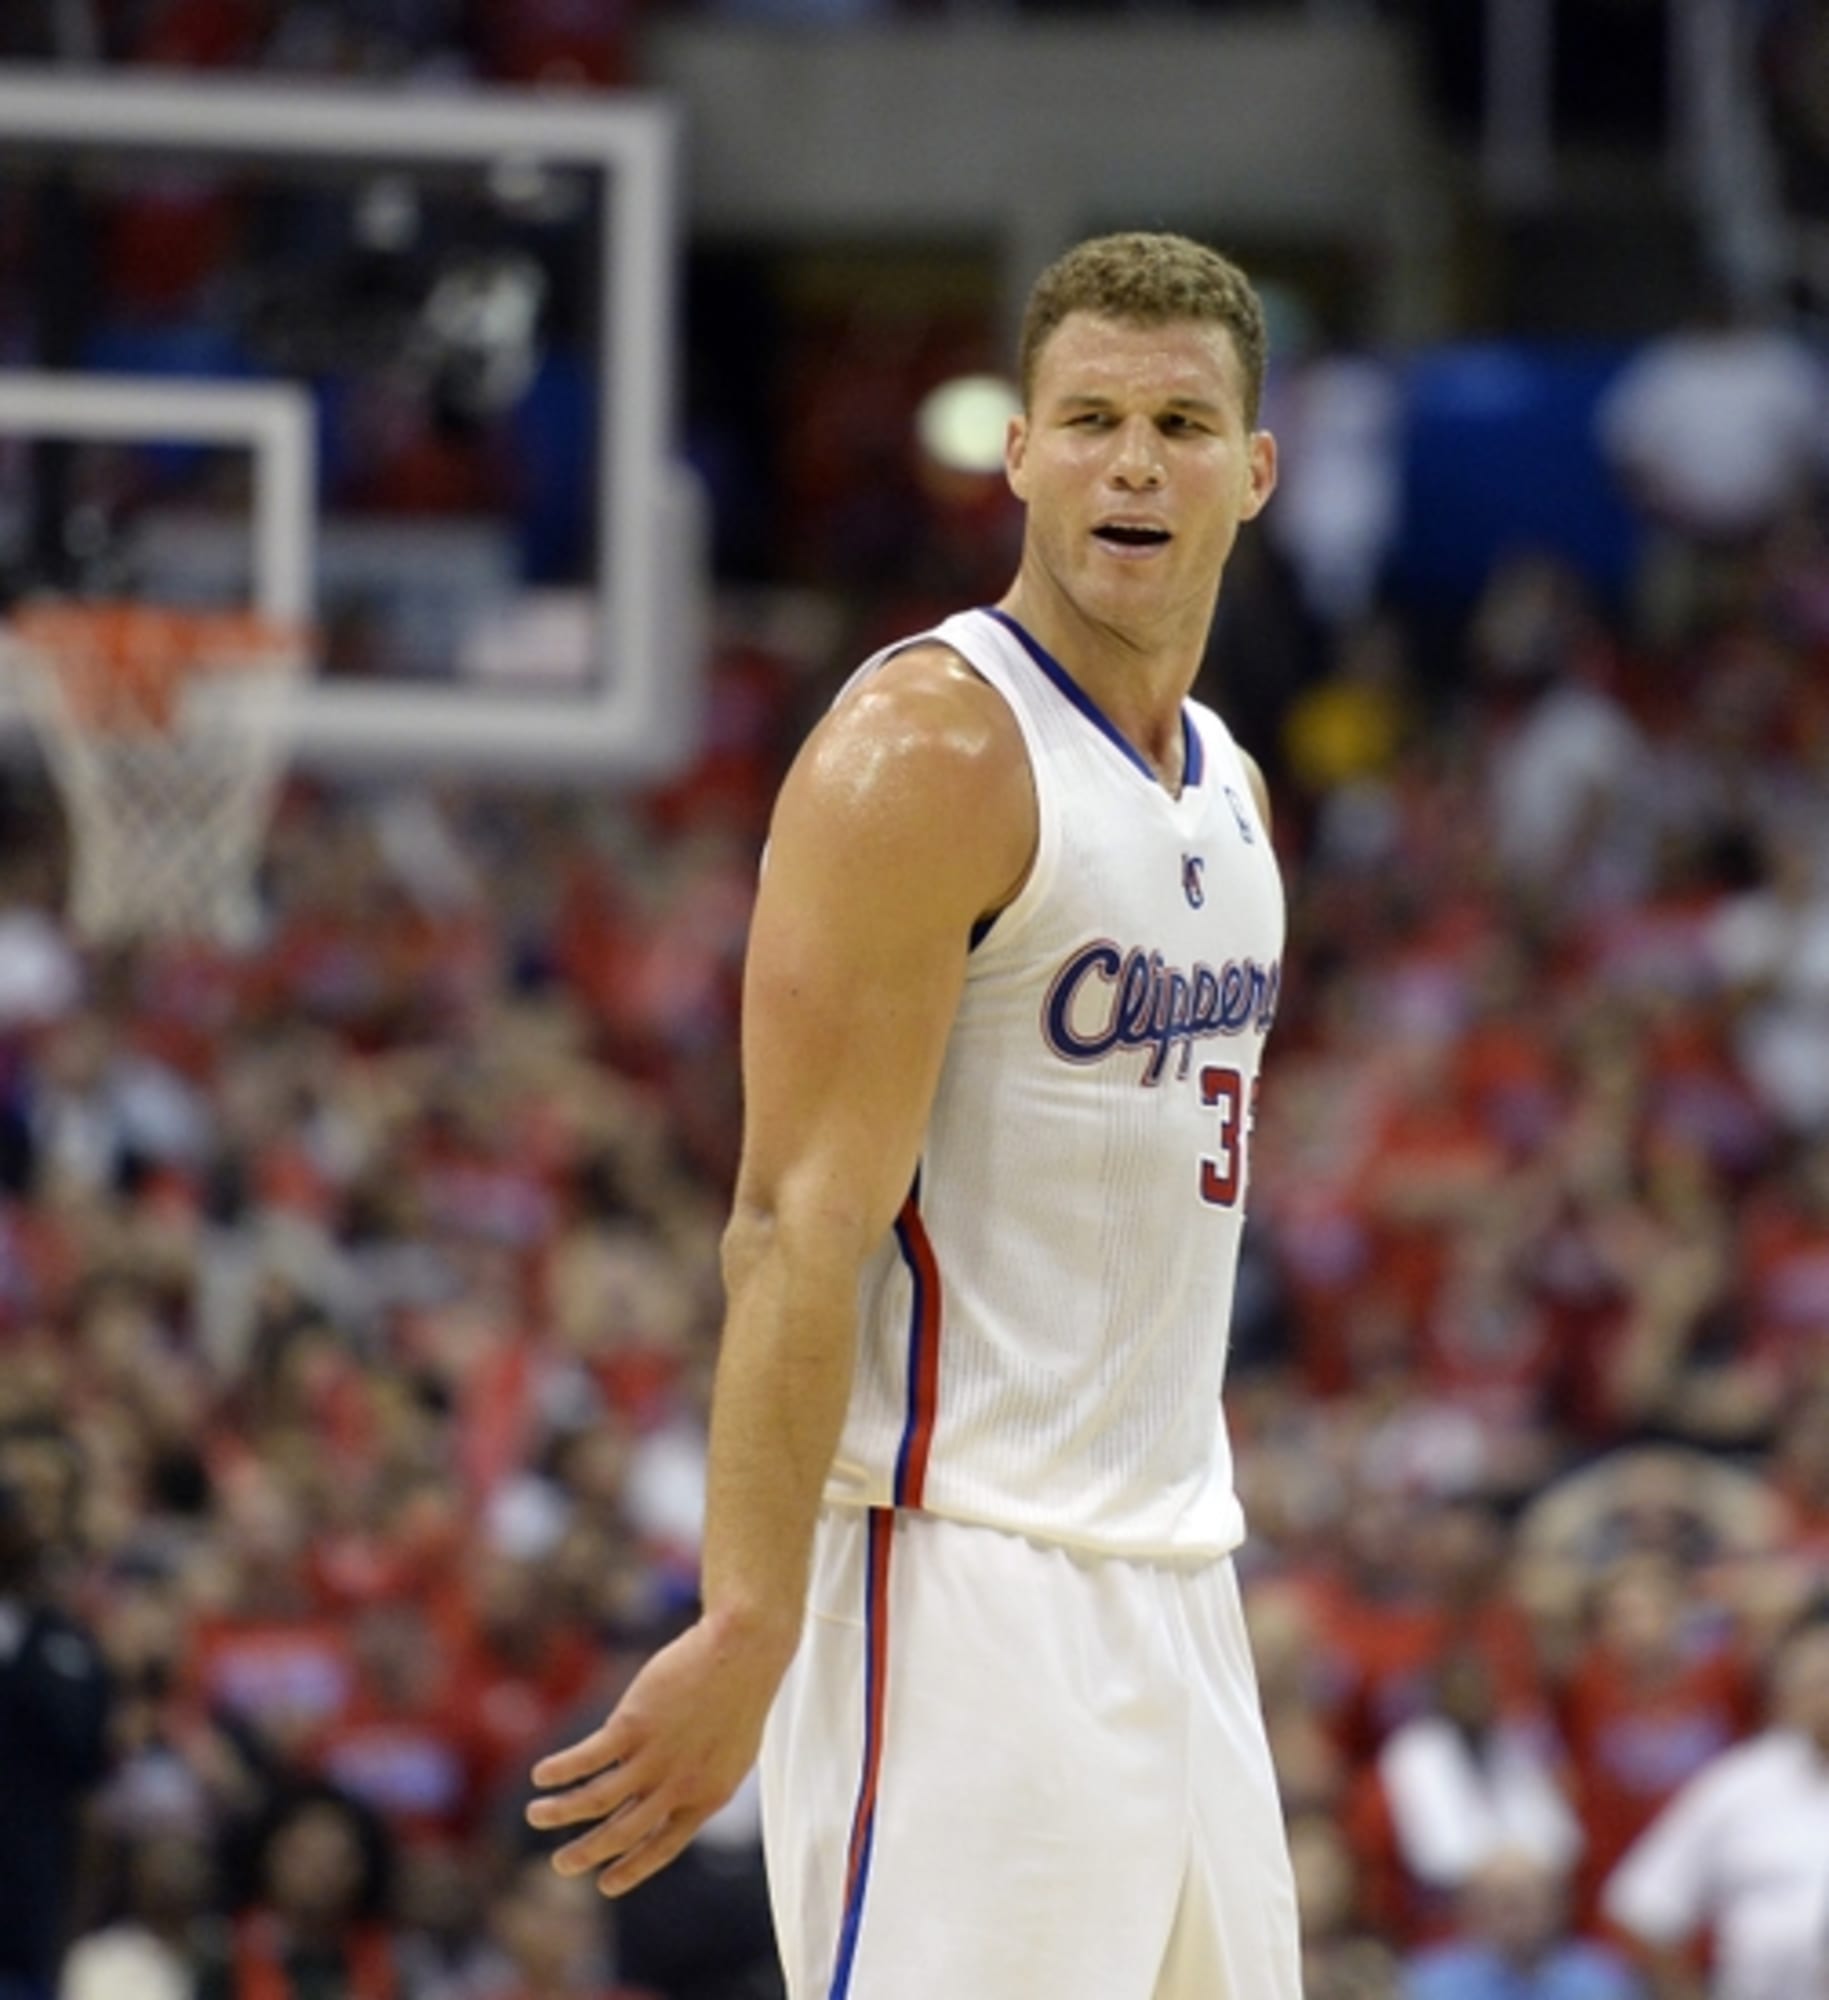 NBA All-Star Game 2014 score update: Blake Griffin leads West to